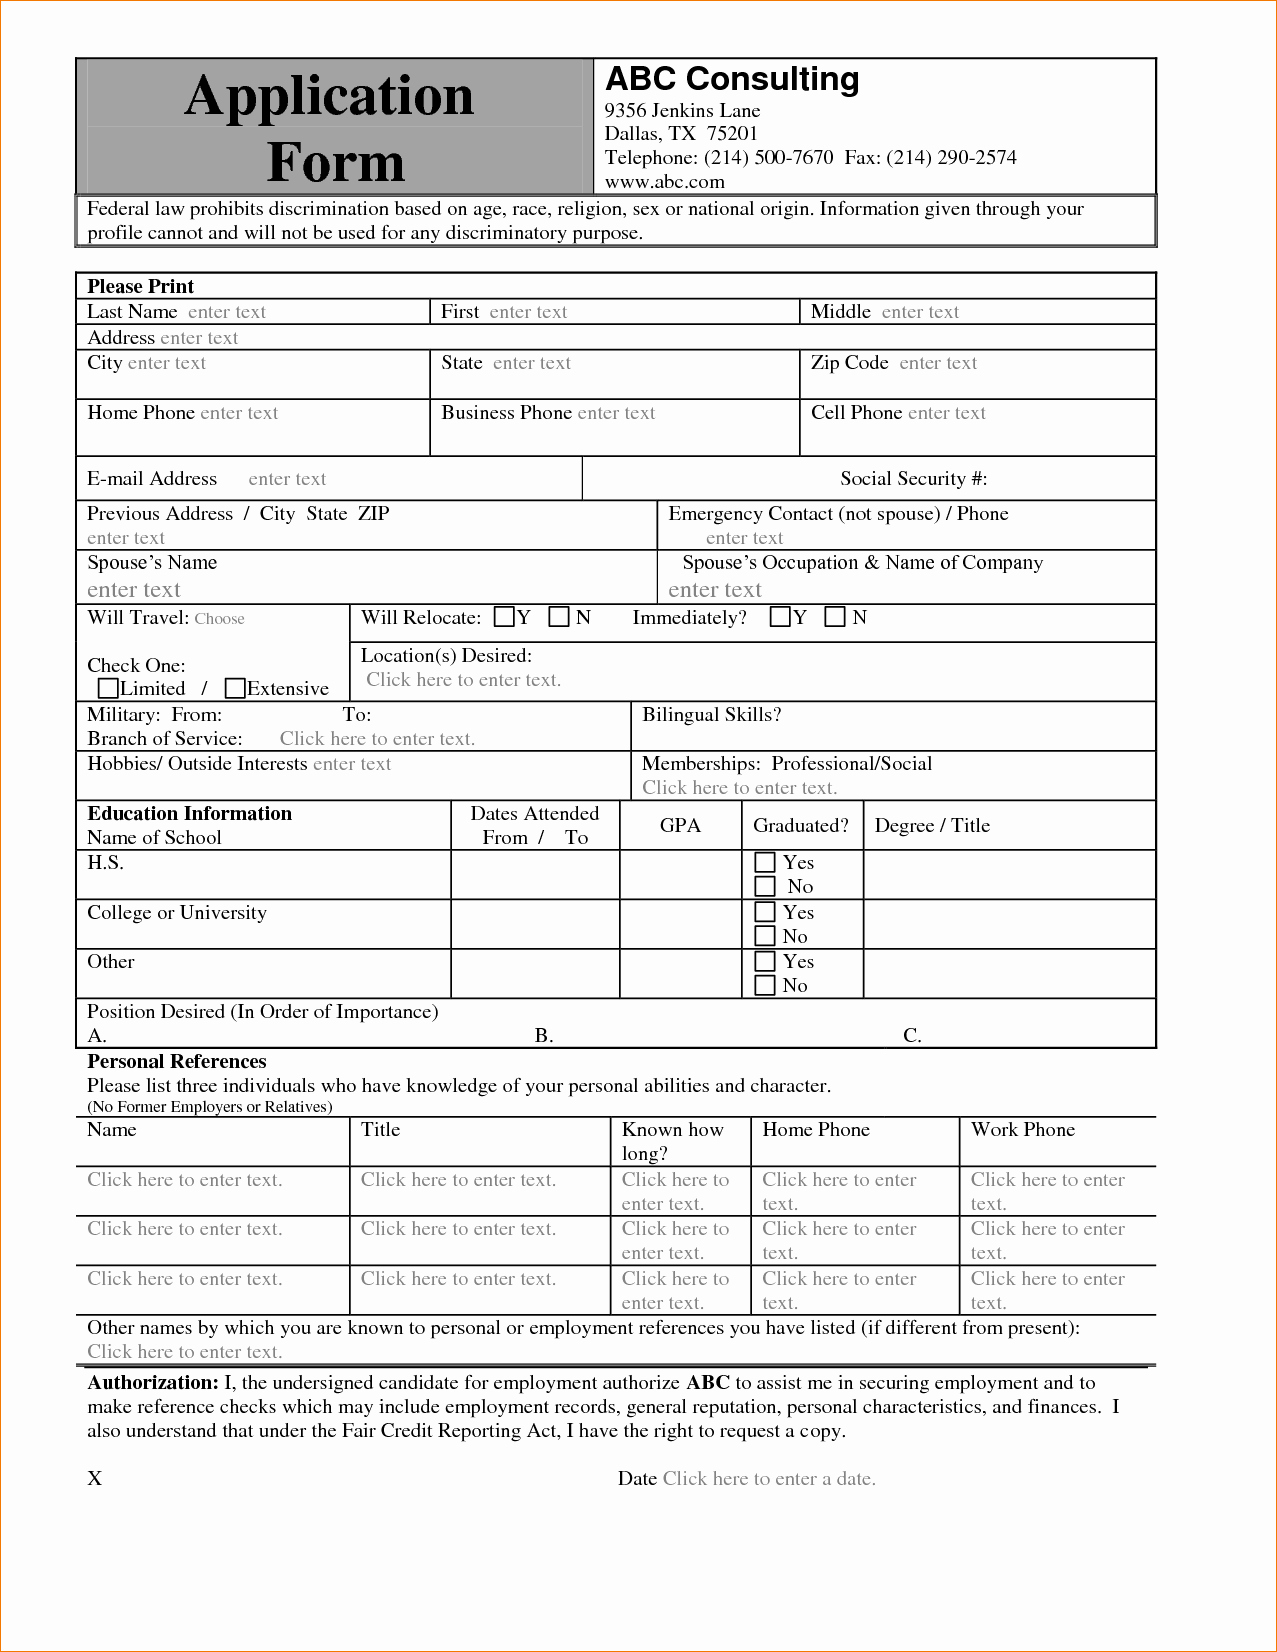 Employment Application Template Microsoft Word With Regard To Employment Application Template Microsoft Word